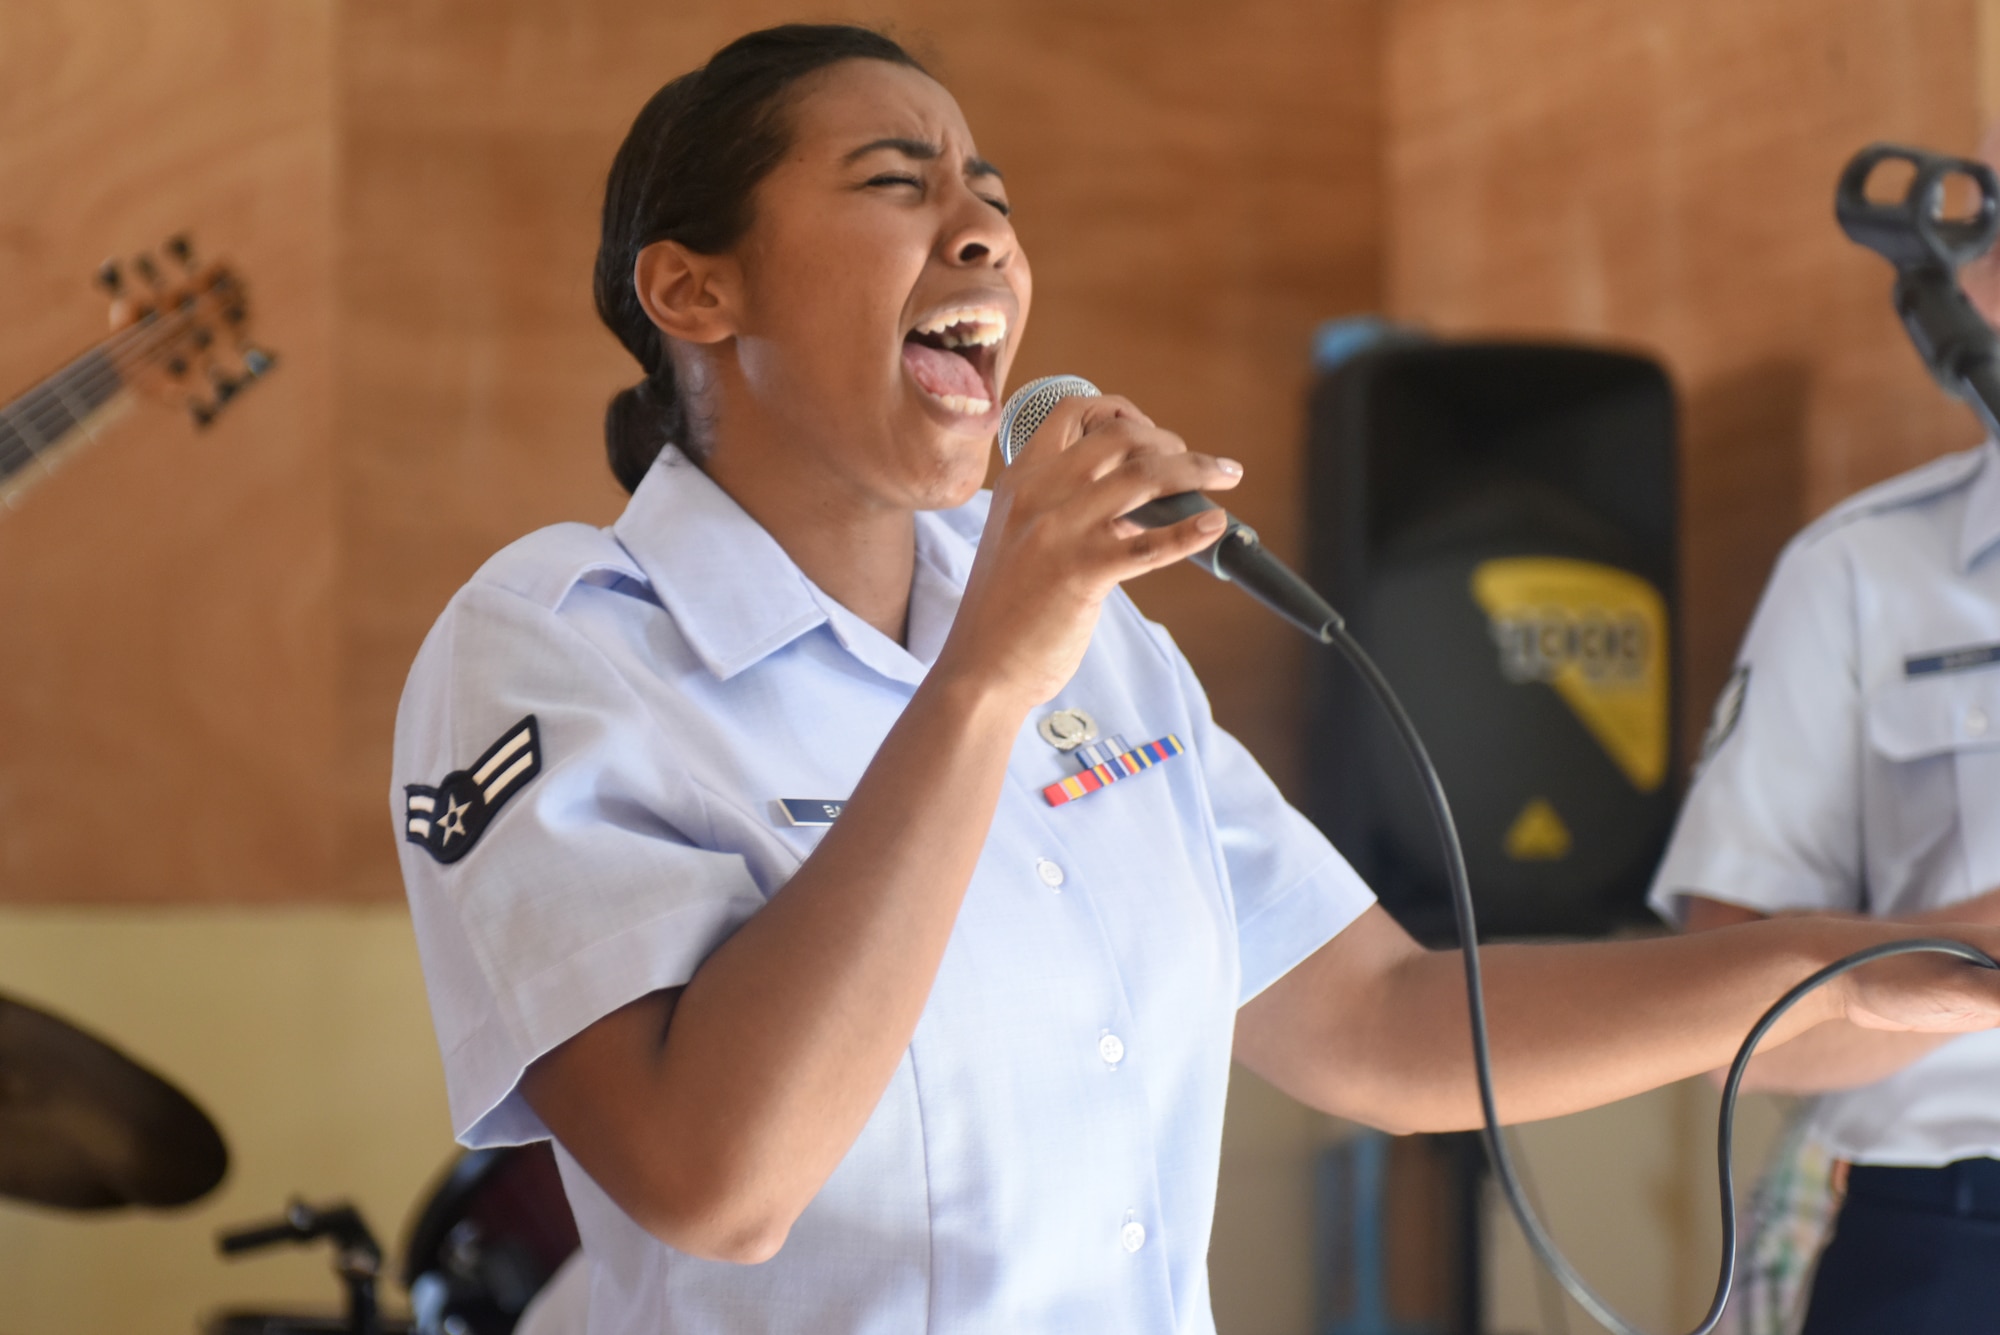 Airman 1st Class Sierra Bailey, U.S. Air Forces in Europe Band vocalist, sings for students of the National School of the Arts in Dakar, Senegal, March 21, 2018. The USAFE Band is in Dakar to support African Partnership Flight Senegal, a military-to-military event focusing on improving professional military aviation knowledge and skills. (U.S. Air Force photo by Airman 1st Class Eli Chevalier)